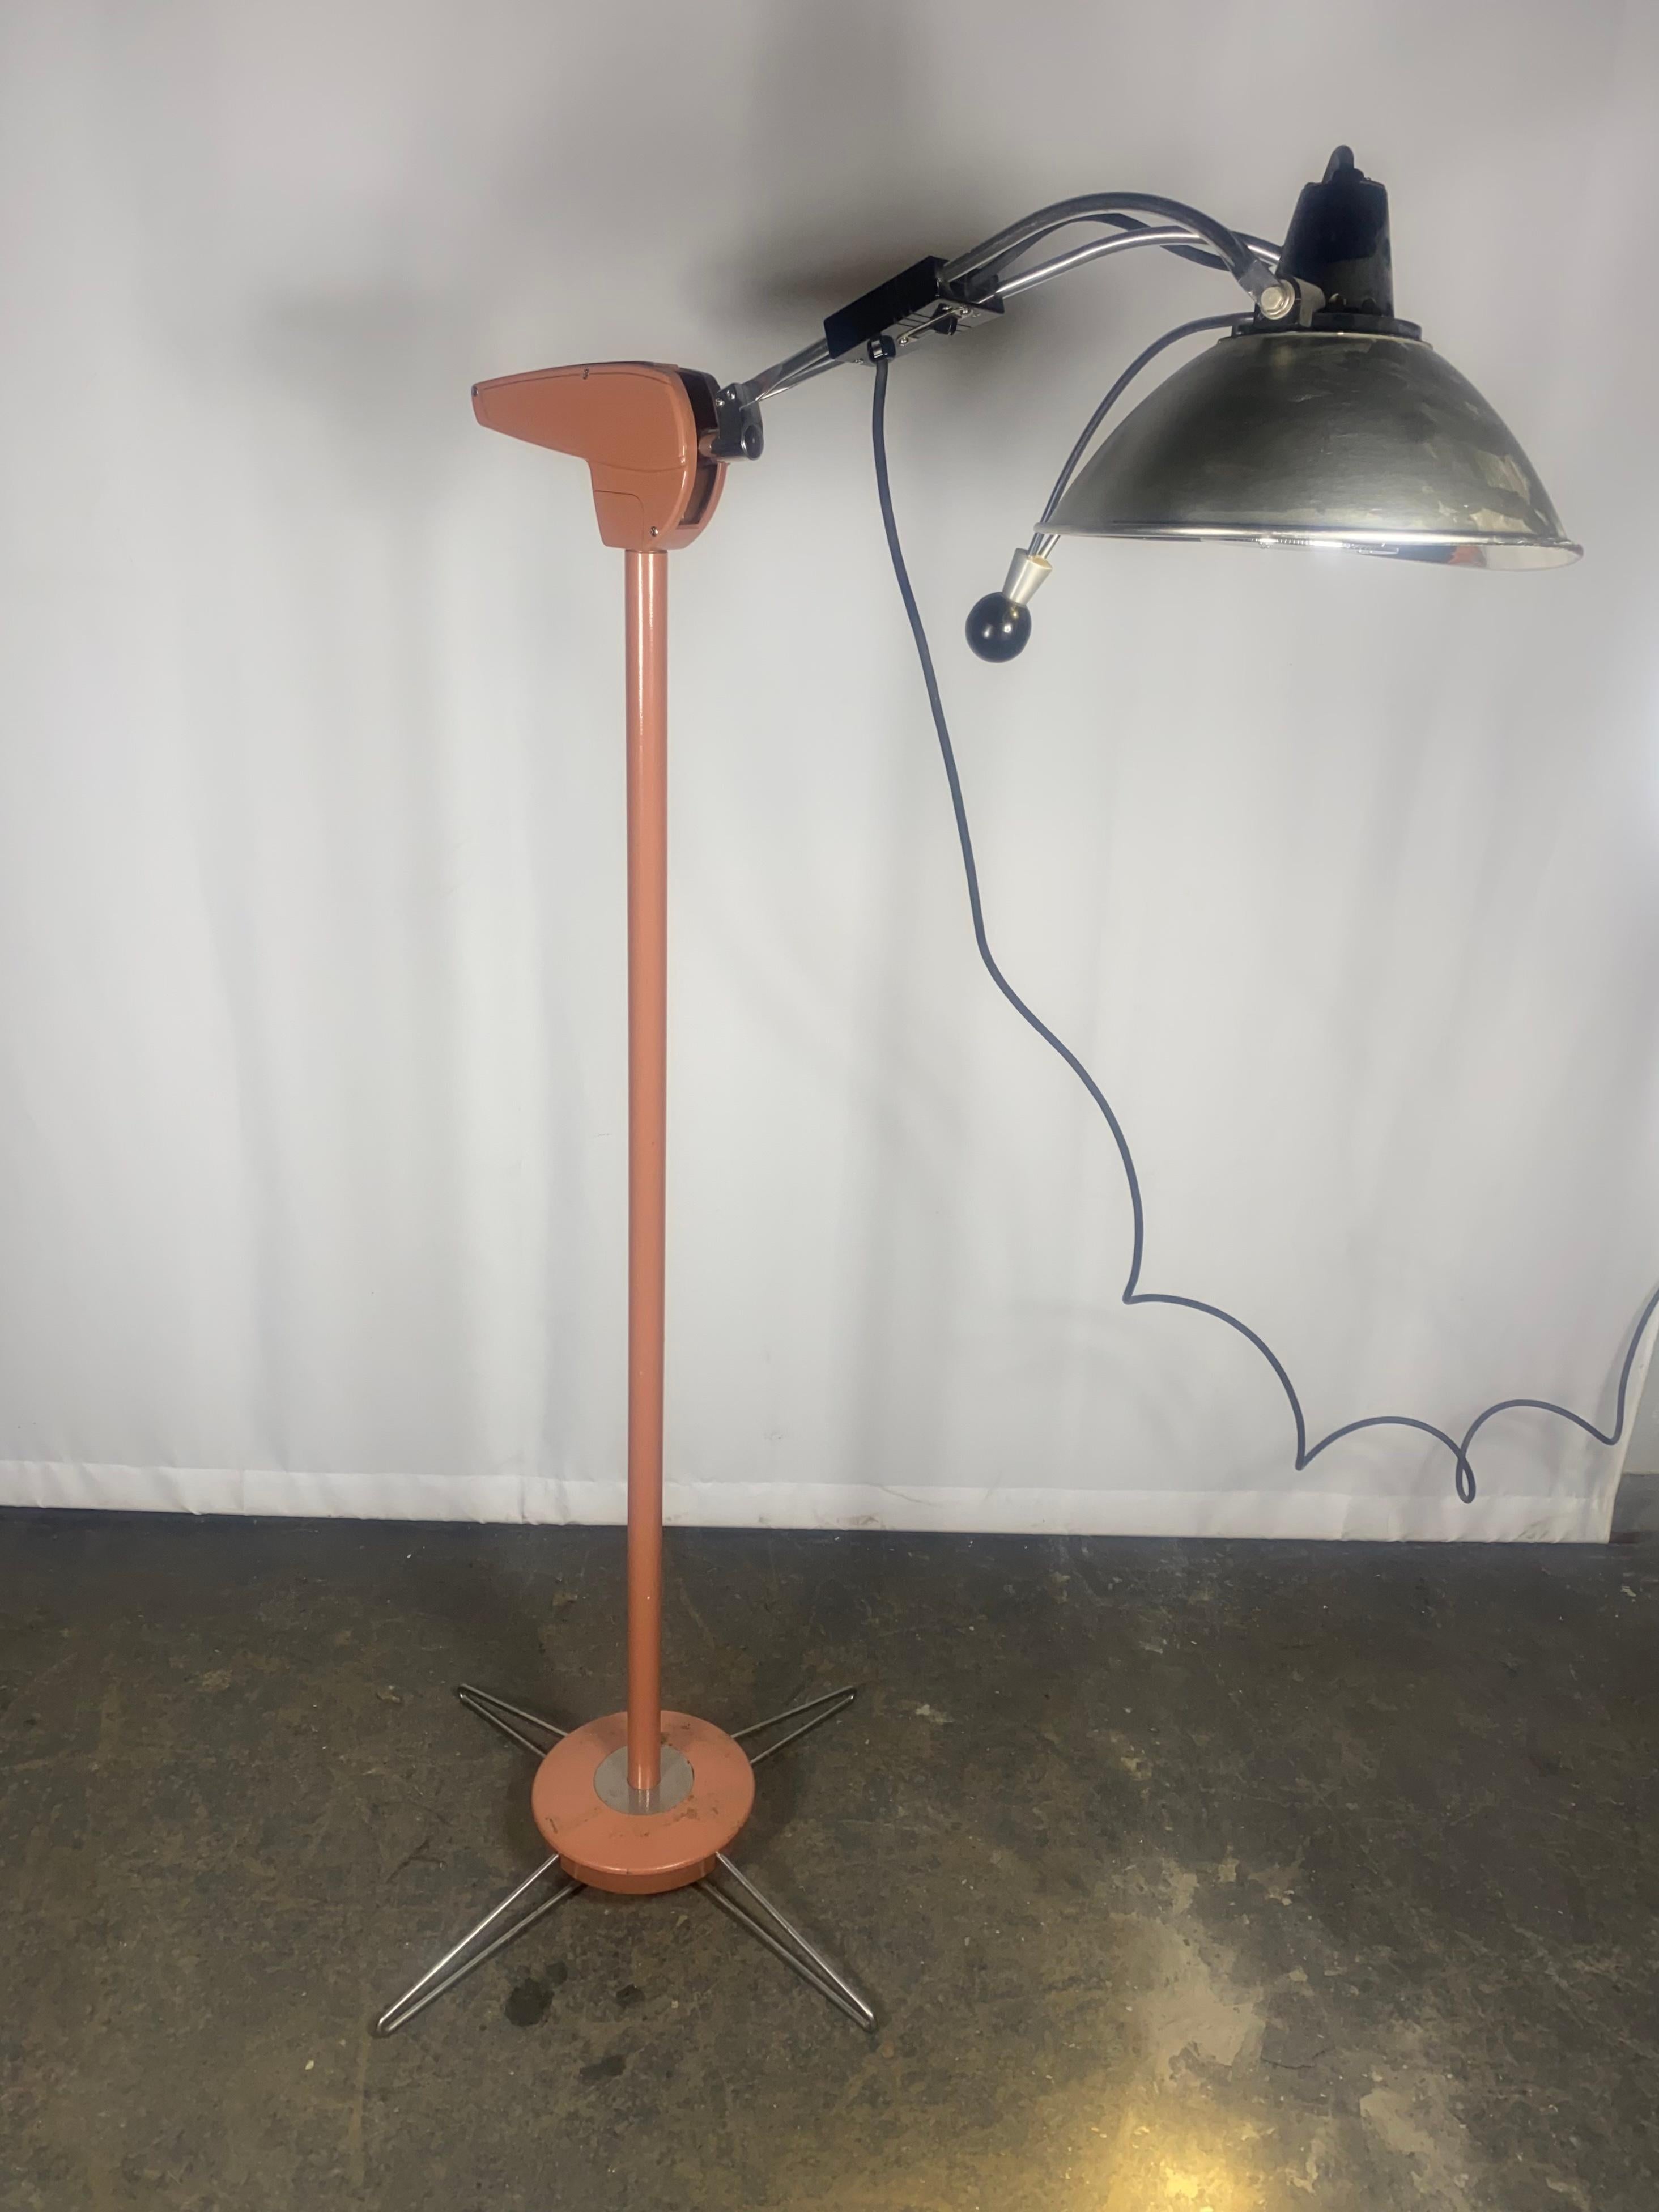 Medical examination floor lamp by Wilmot Castle Company, Rochester, N.Y. Amazing color and design,, Beautiful glow when lit,, 